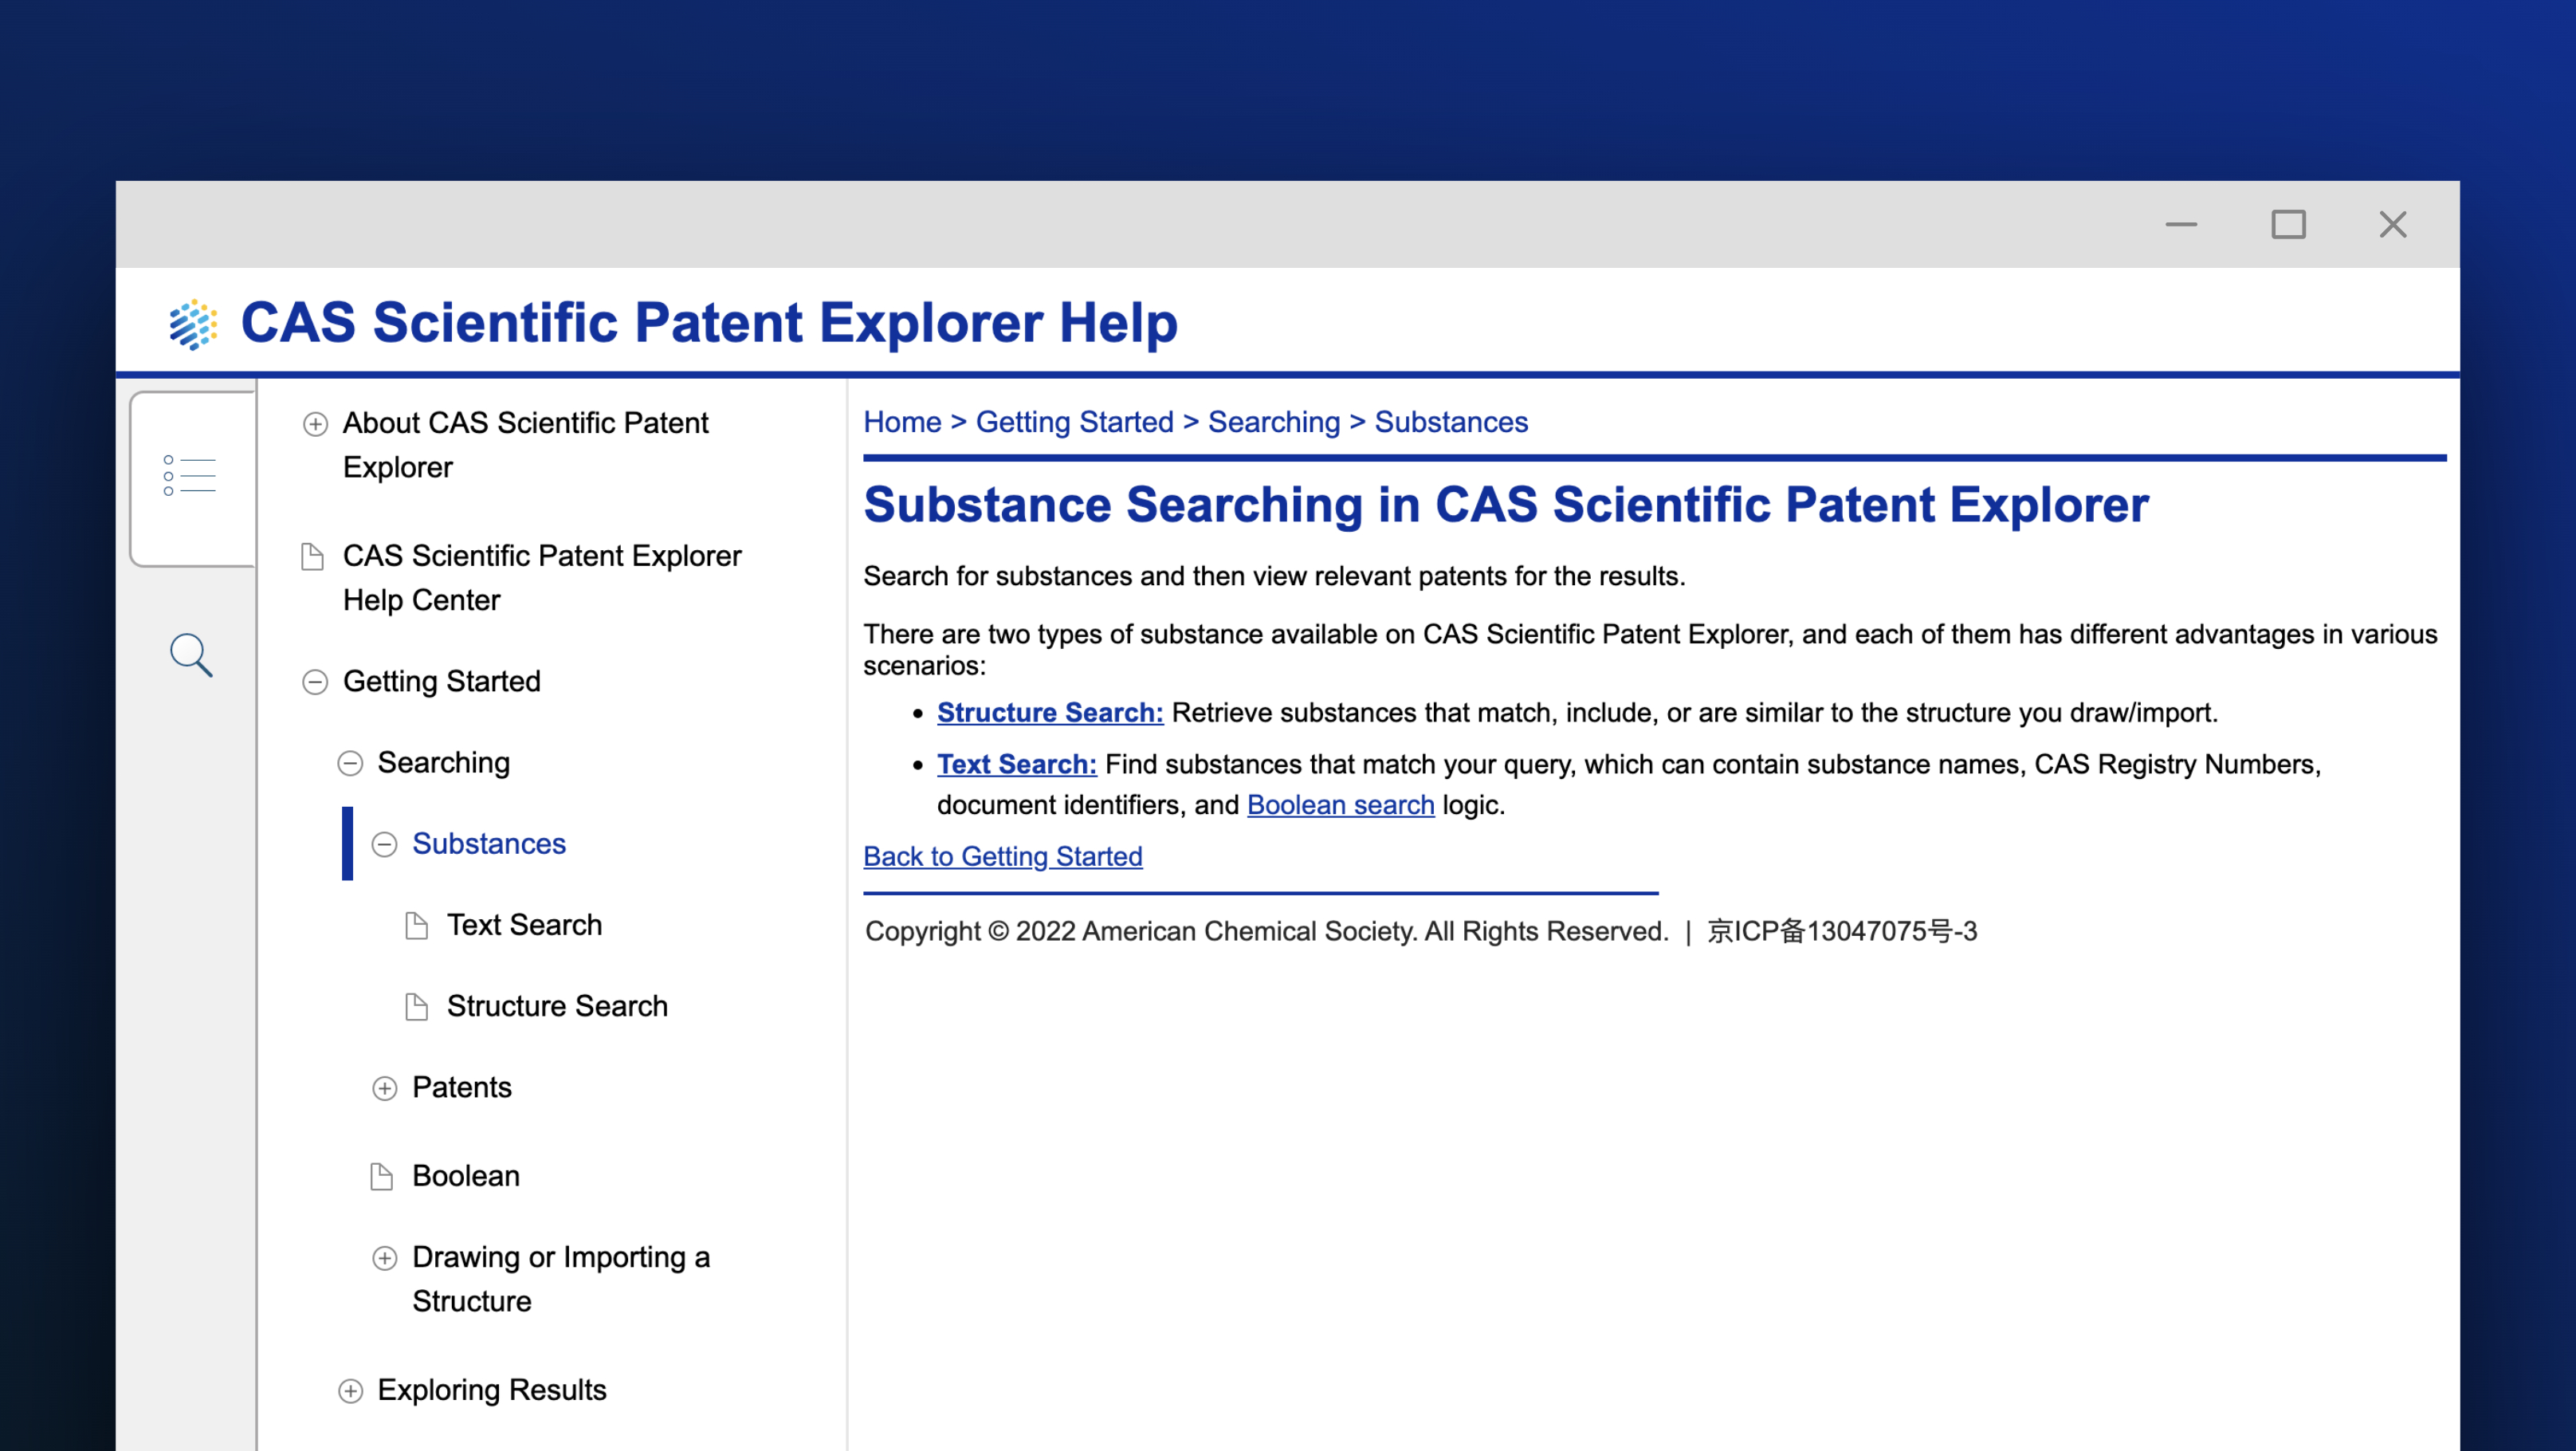 Substance Searching in CAS Scientific Patent Explorer screenshot